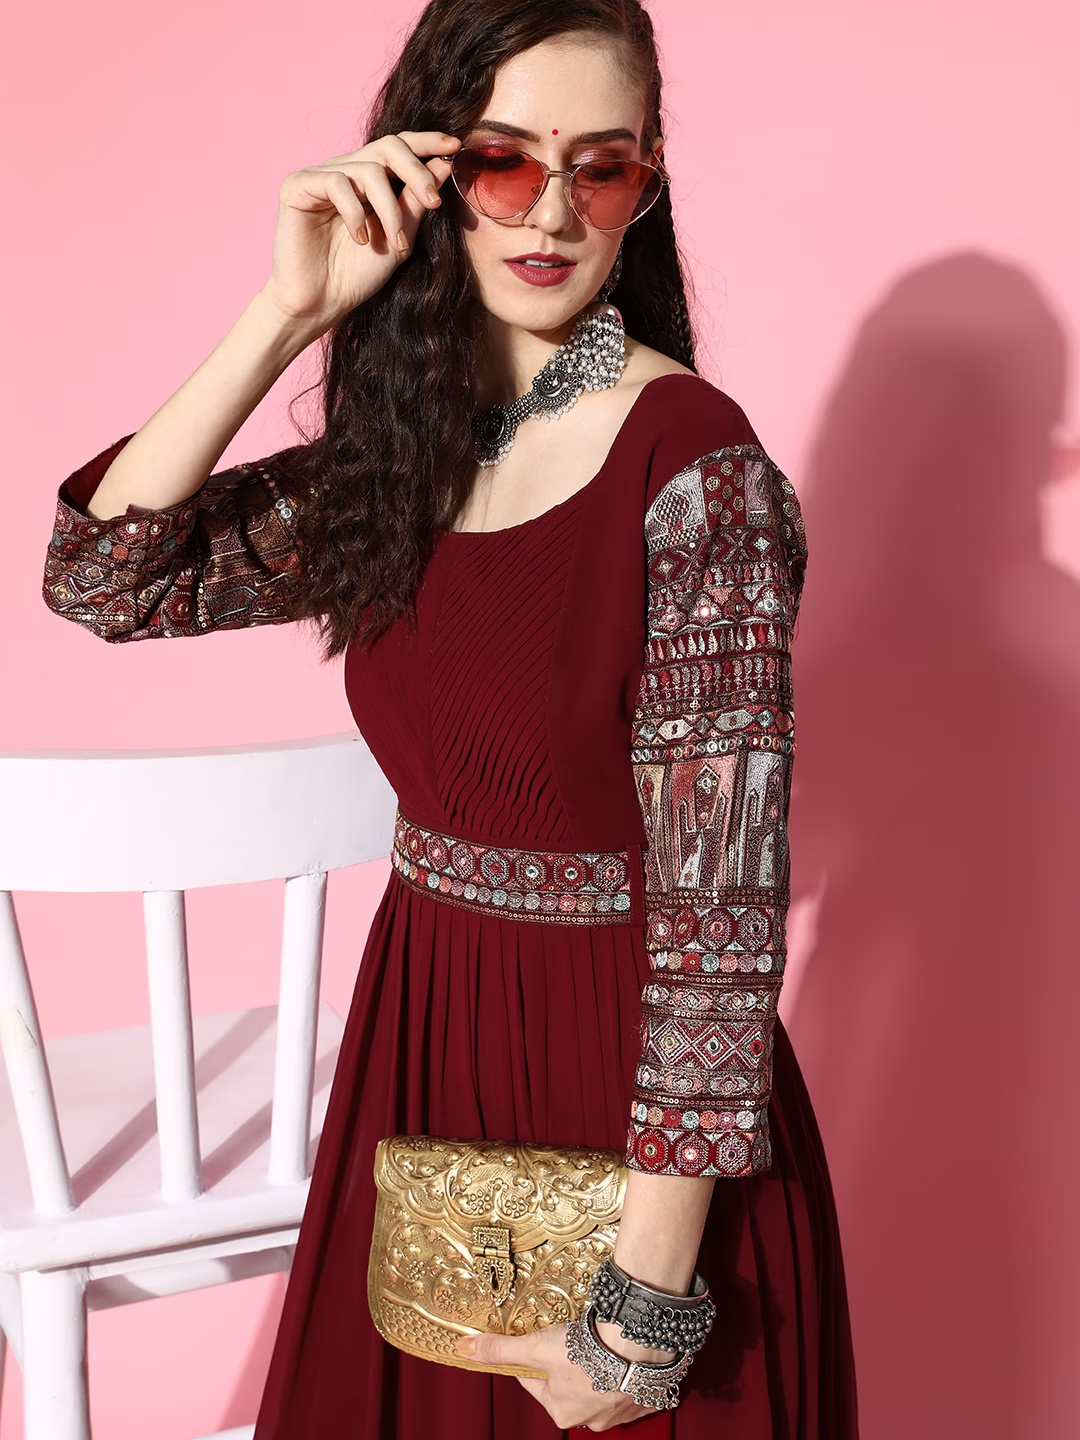 Women Charming Maroon Ethnic Motifs Gown for Days